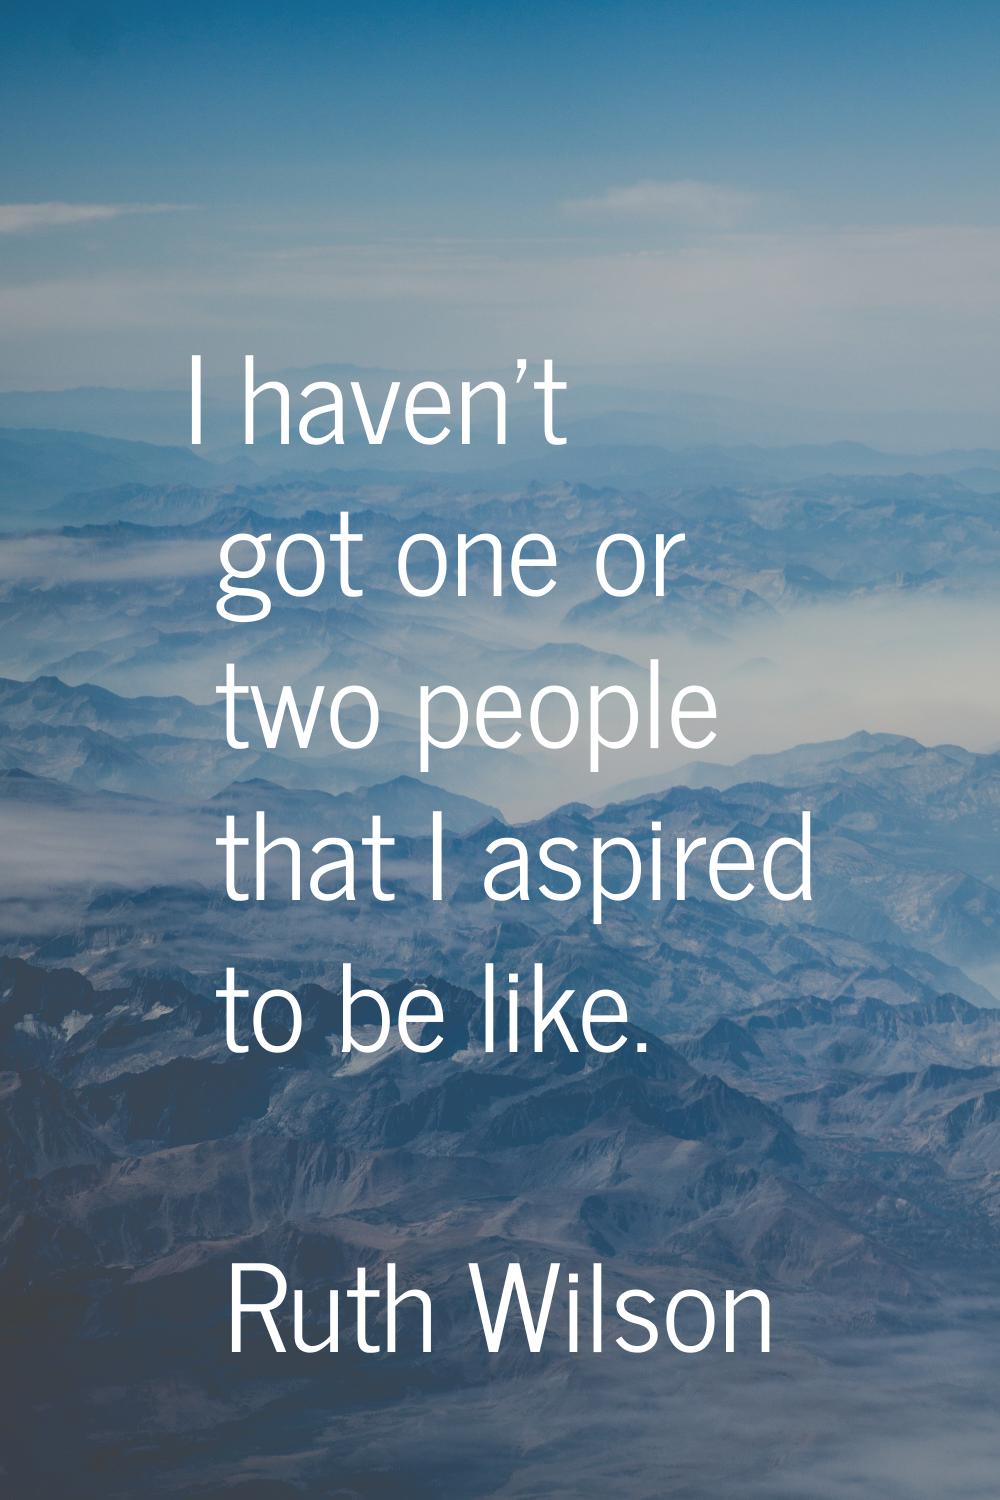 I haven't got one or two people that I aspired to be like.